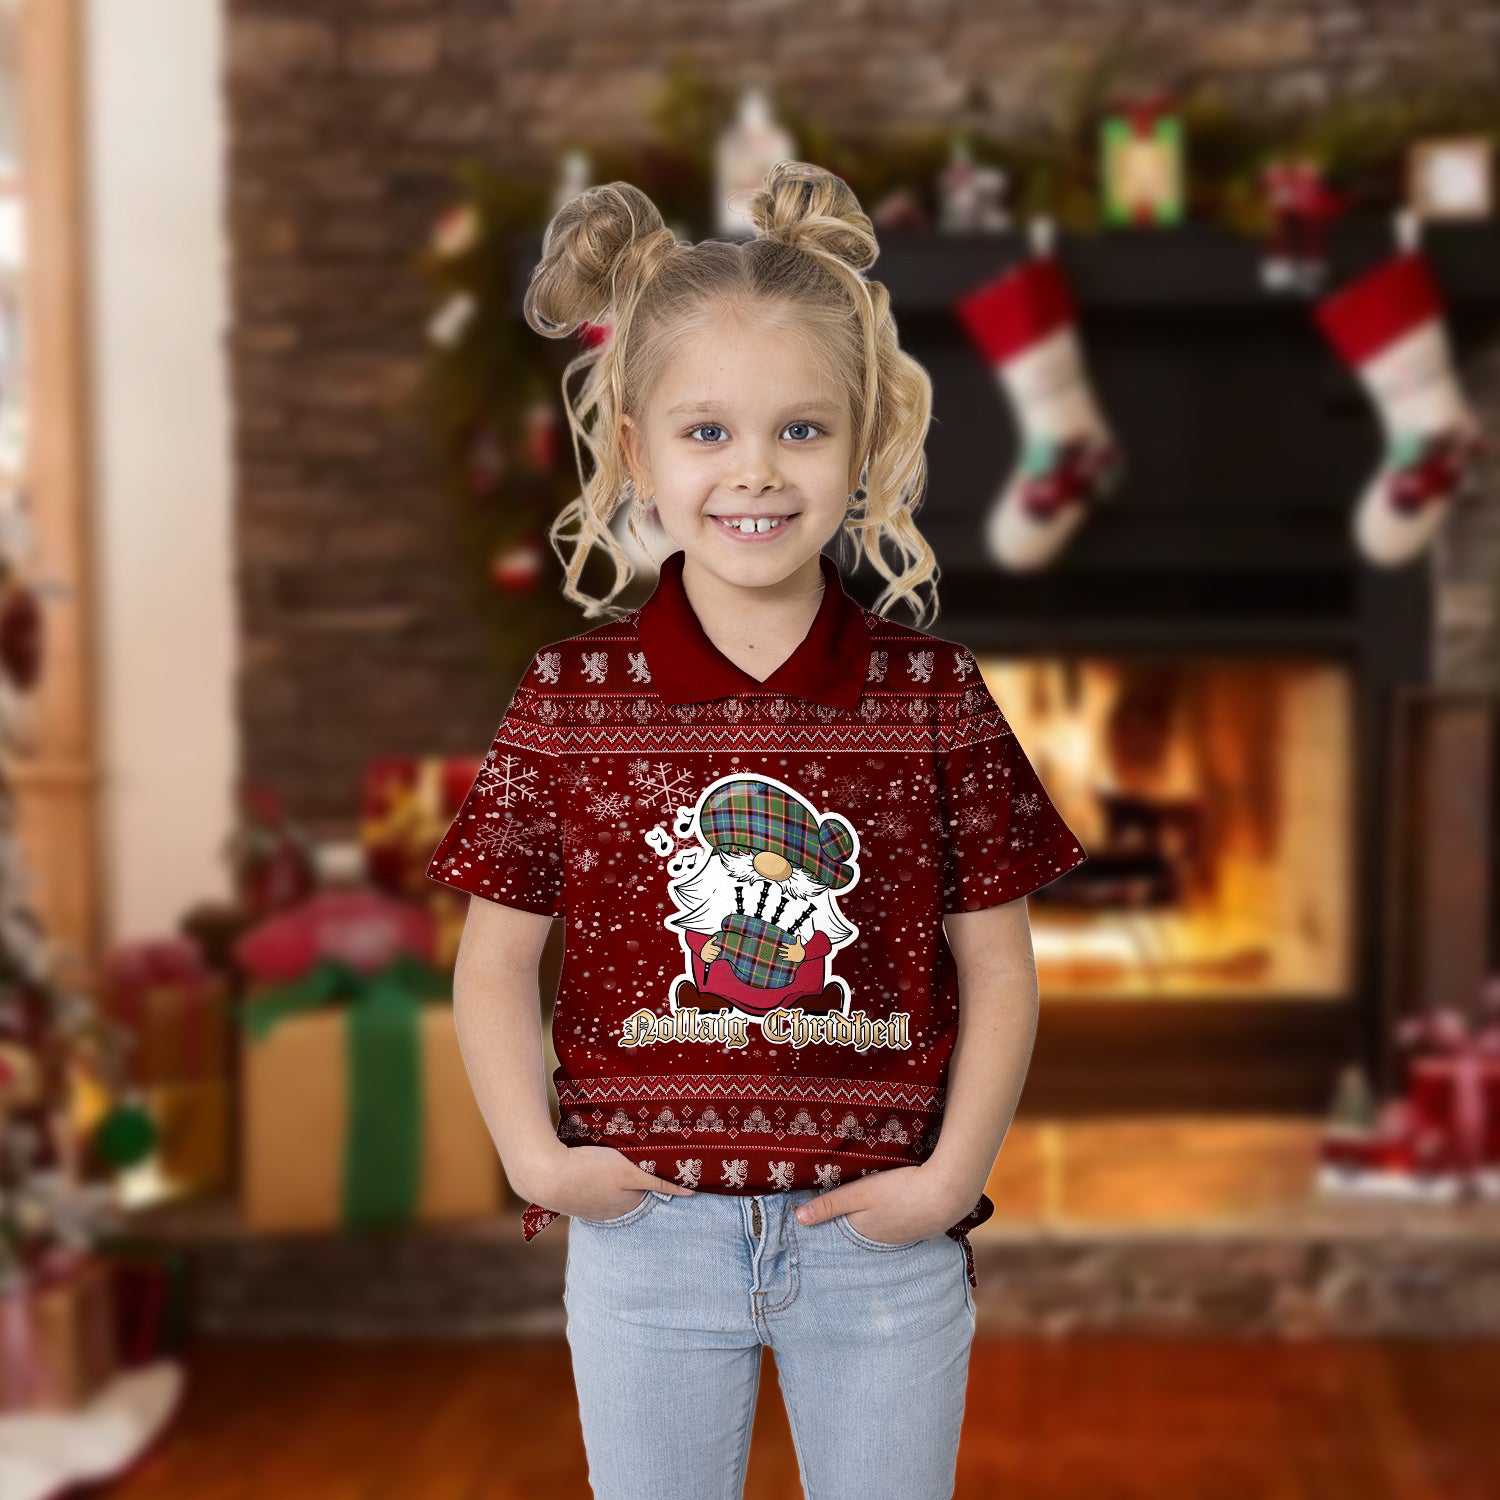 Stirling Bannockburn Clan Christmas Family Polo Shirt with Funny Gnome Playing Bagpipes Kid's Polo Shirt Red - Tartanvibesclothing